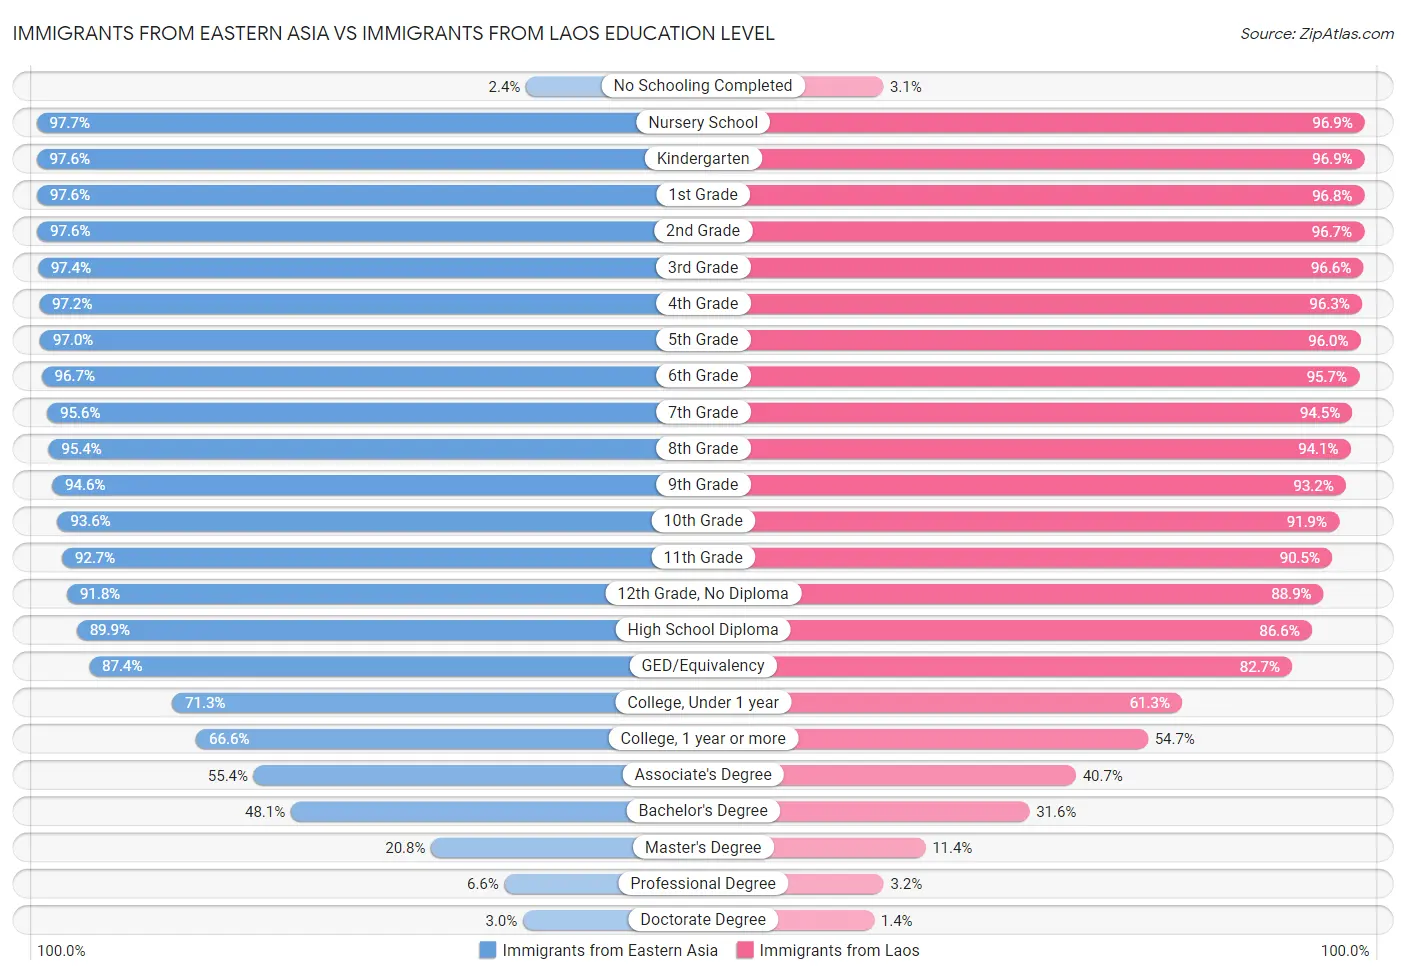 Immigrants from Eastern Asia vs Immigrants from Laos Education Level